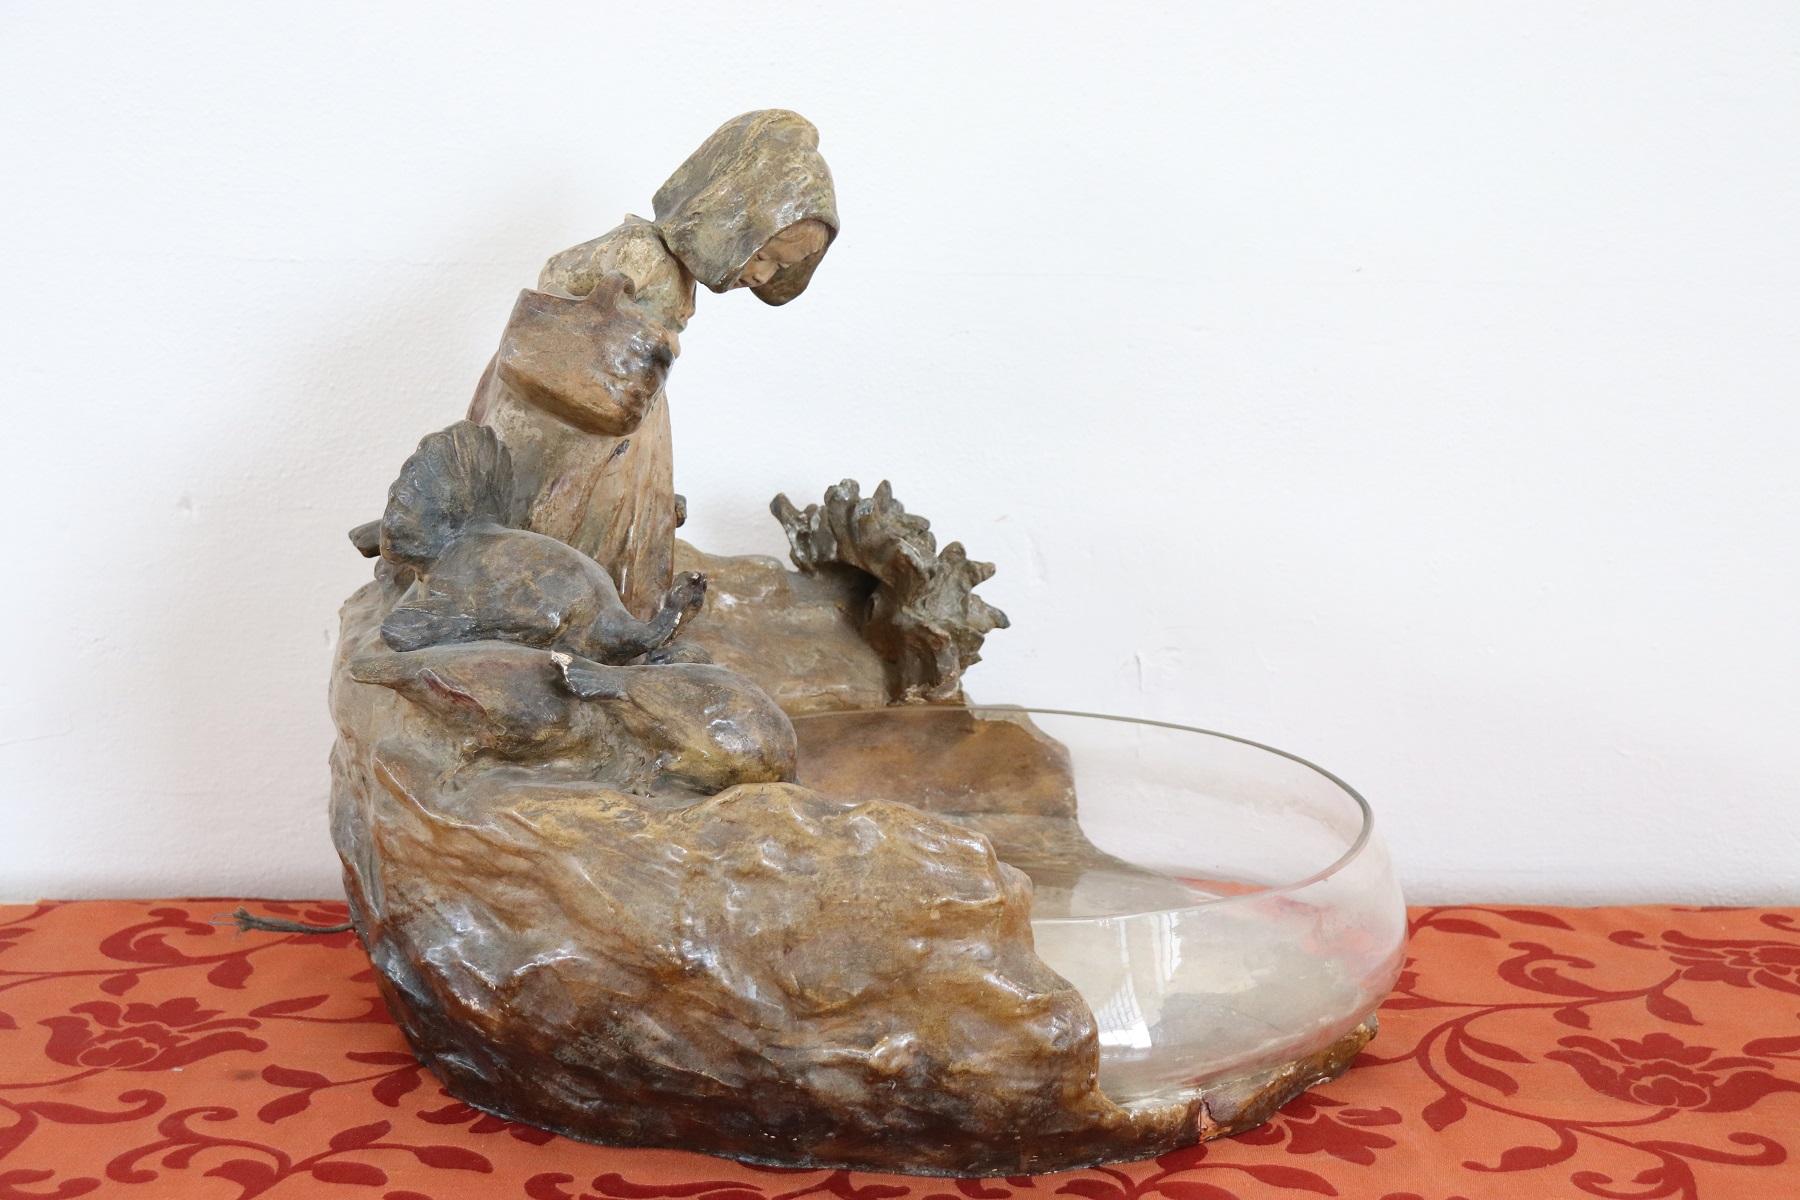 A fine plaster sculpture of a girl with ducks at a lake. The large glass bowl was intended to hold water. The sculpture can be illuminated the electrical system must be restored. Please look at every detail of the sweet face of the little girl who